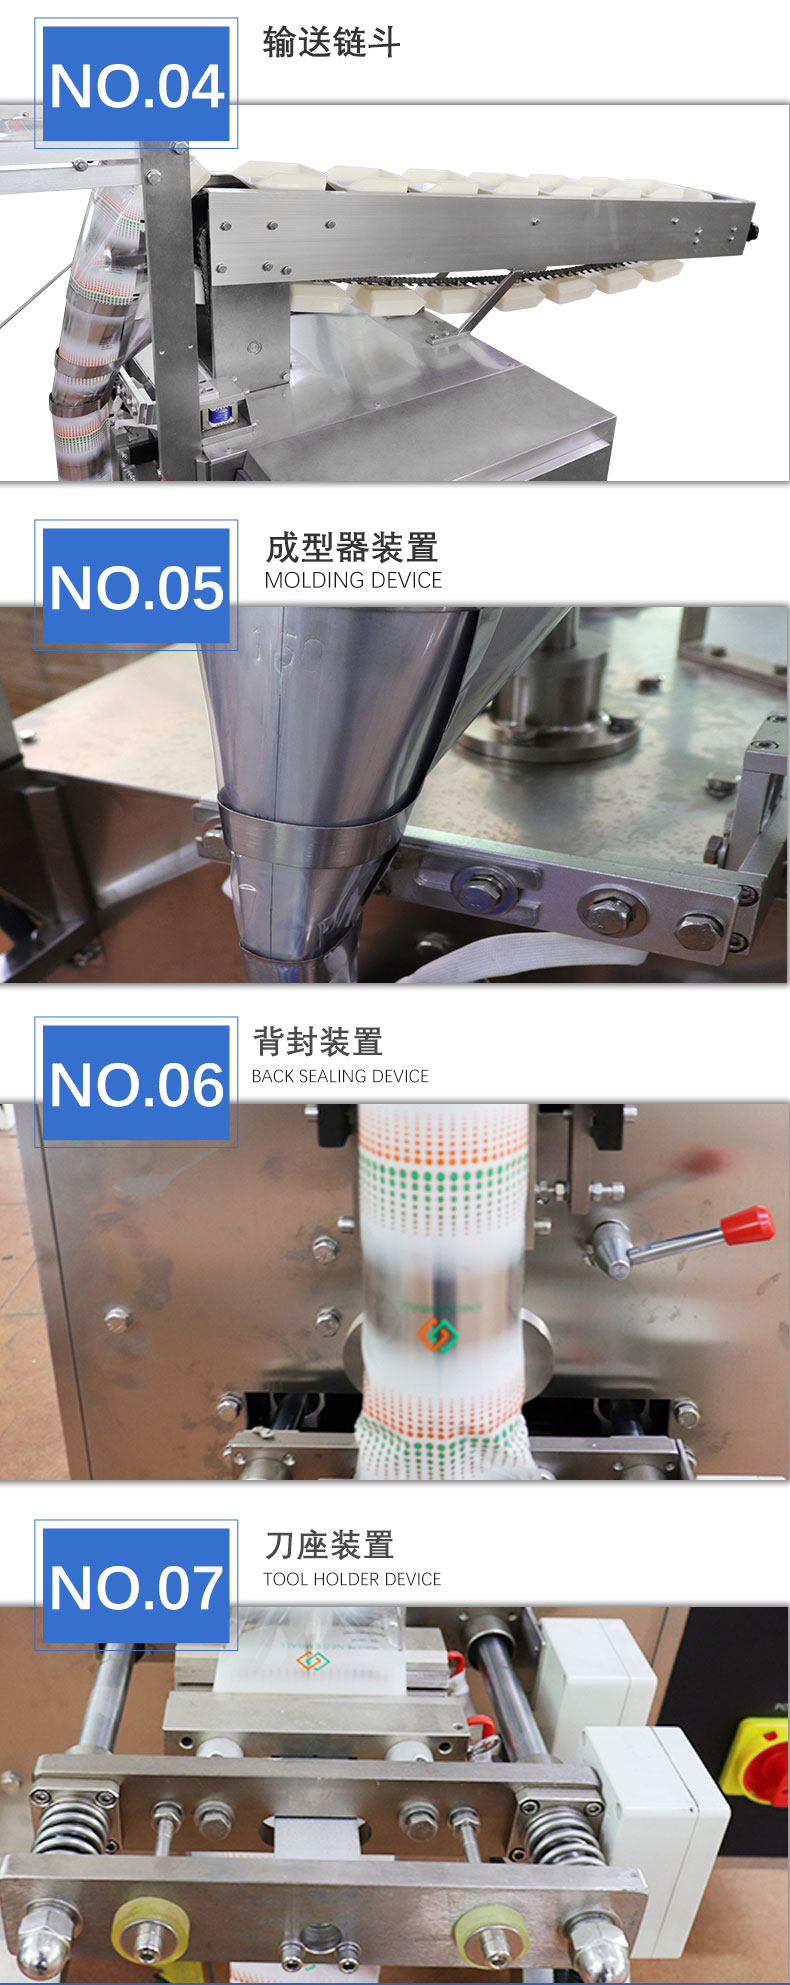 Quantitative wet Rice noodles bagging and sealing machine Chain bucket type noodle bagging and packaging equipment Wet noodle packaging machinery